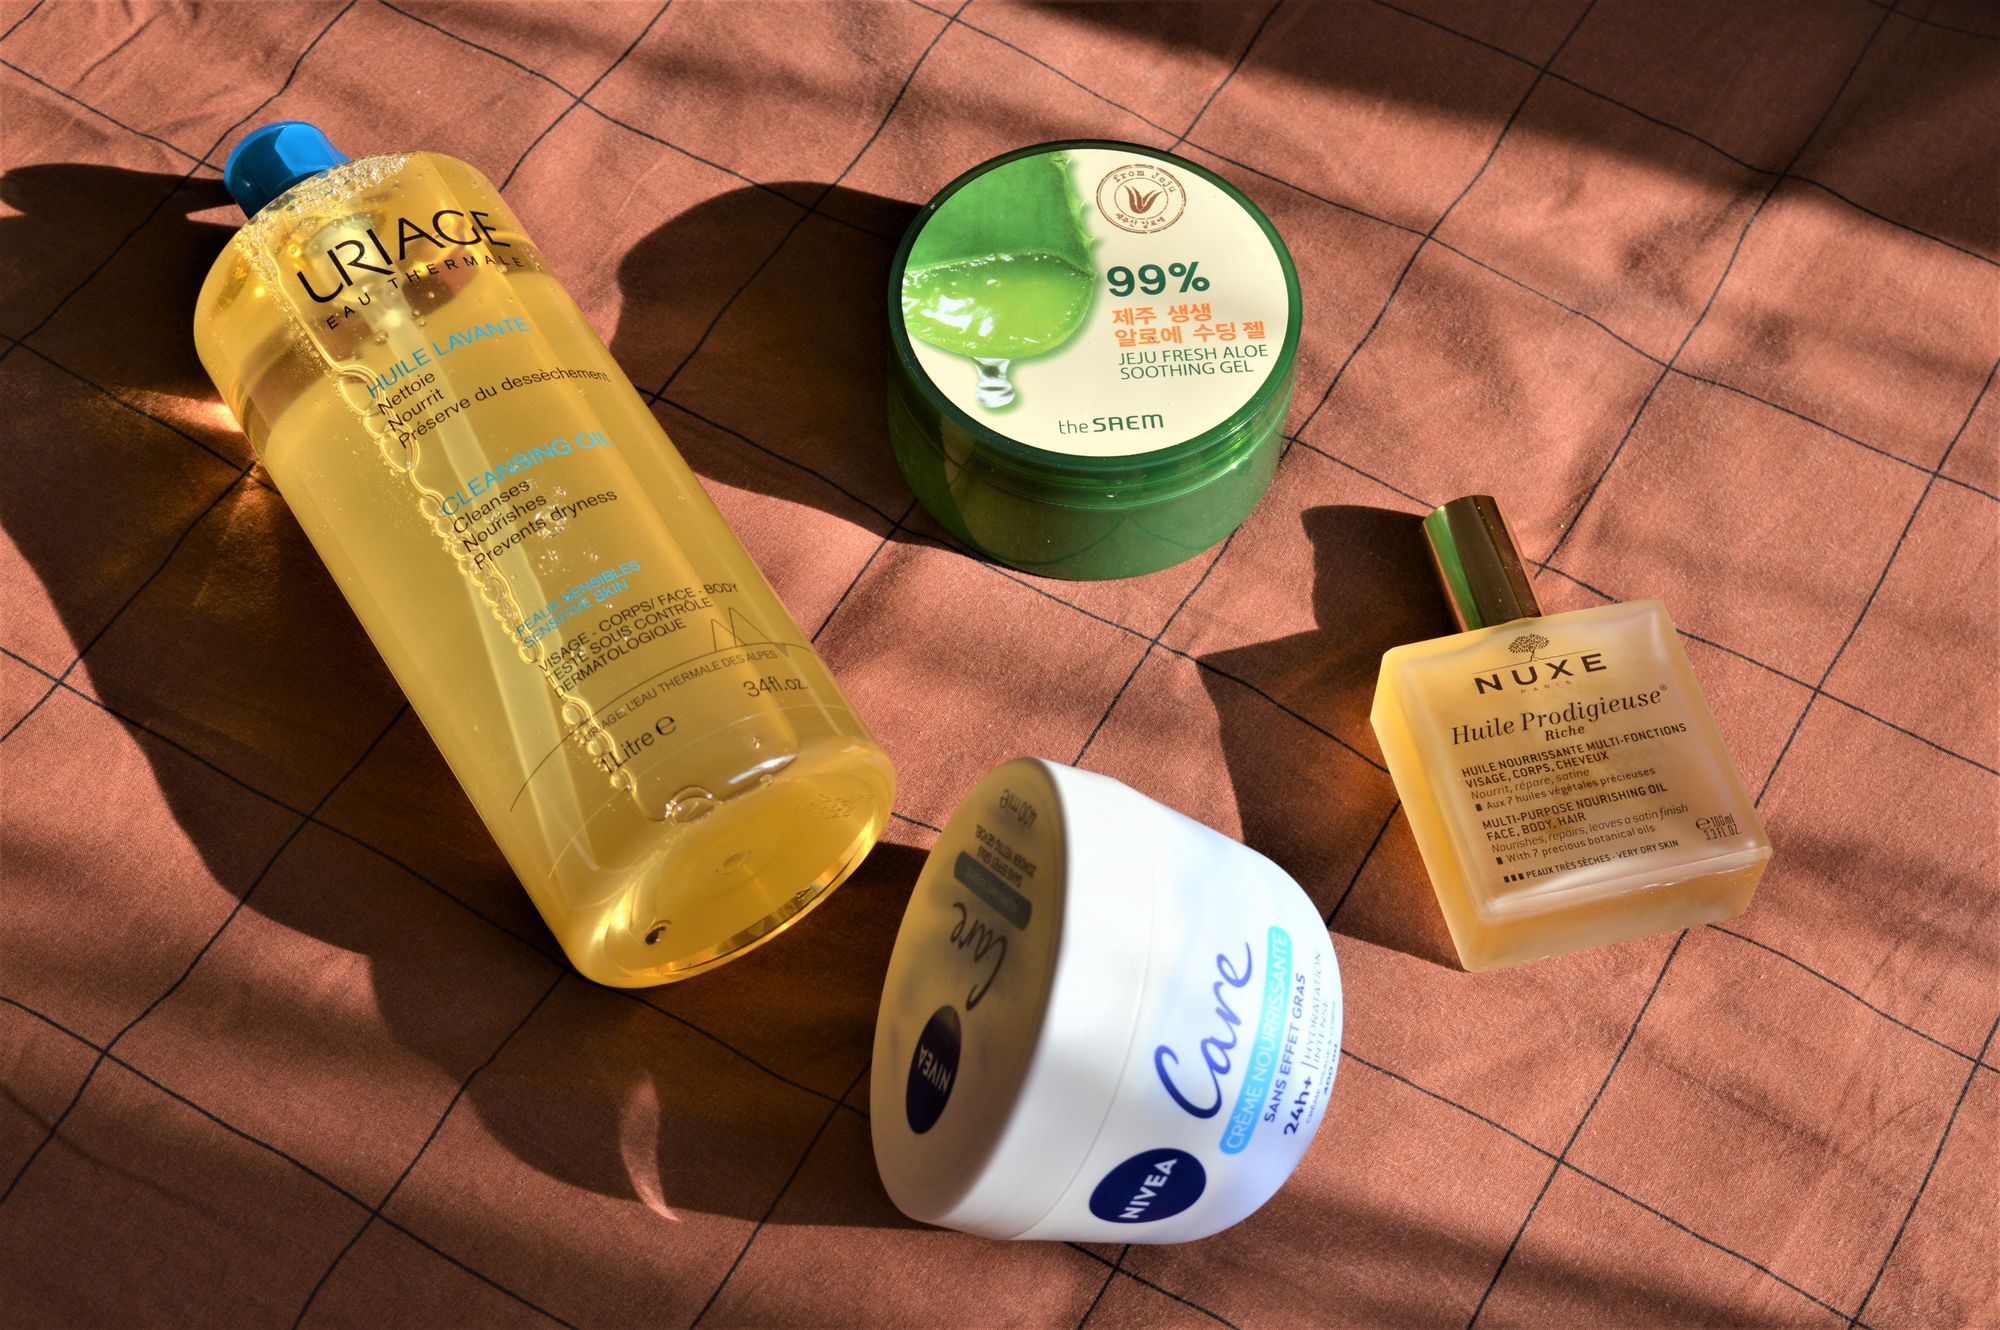 Routine care: from skin to soul